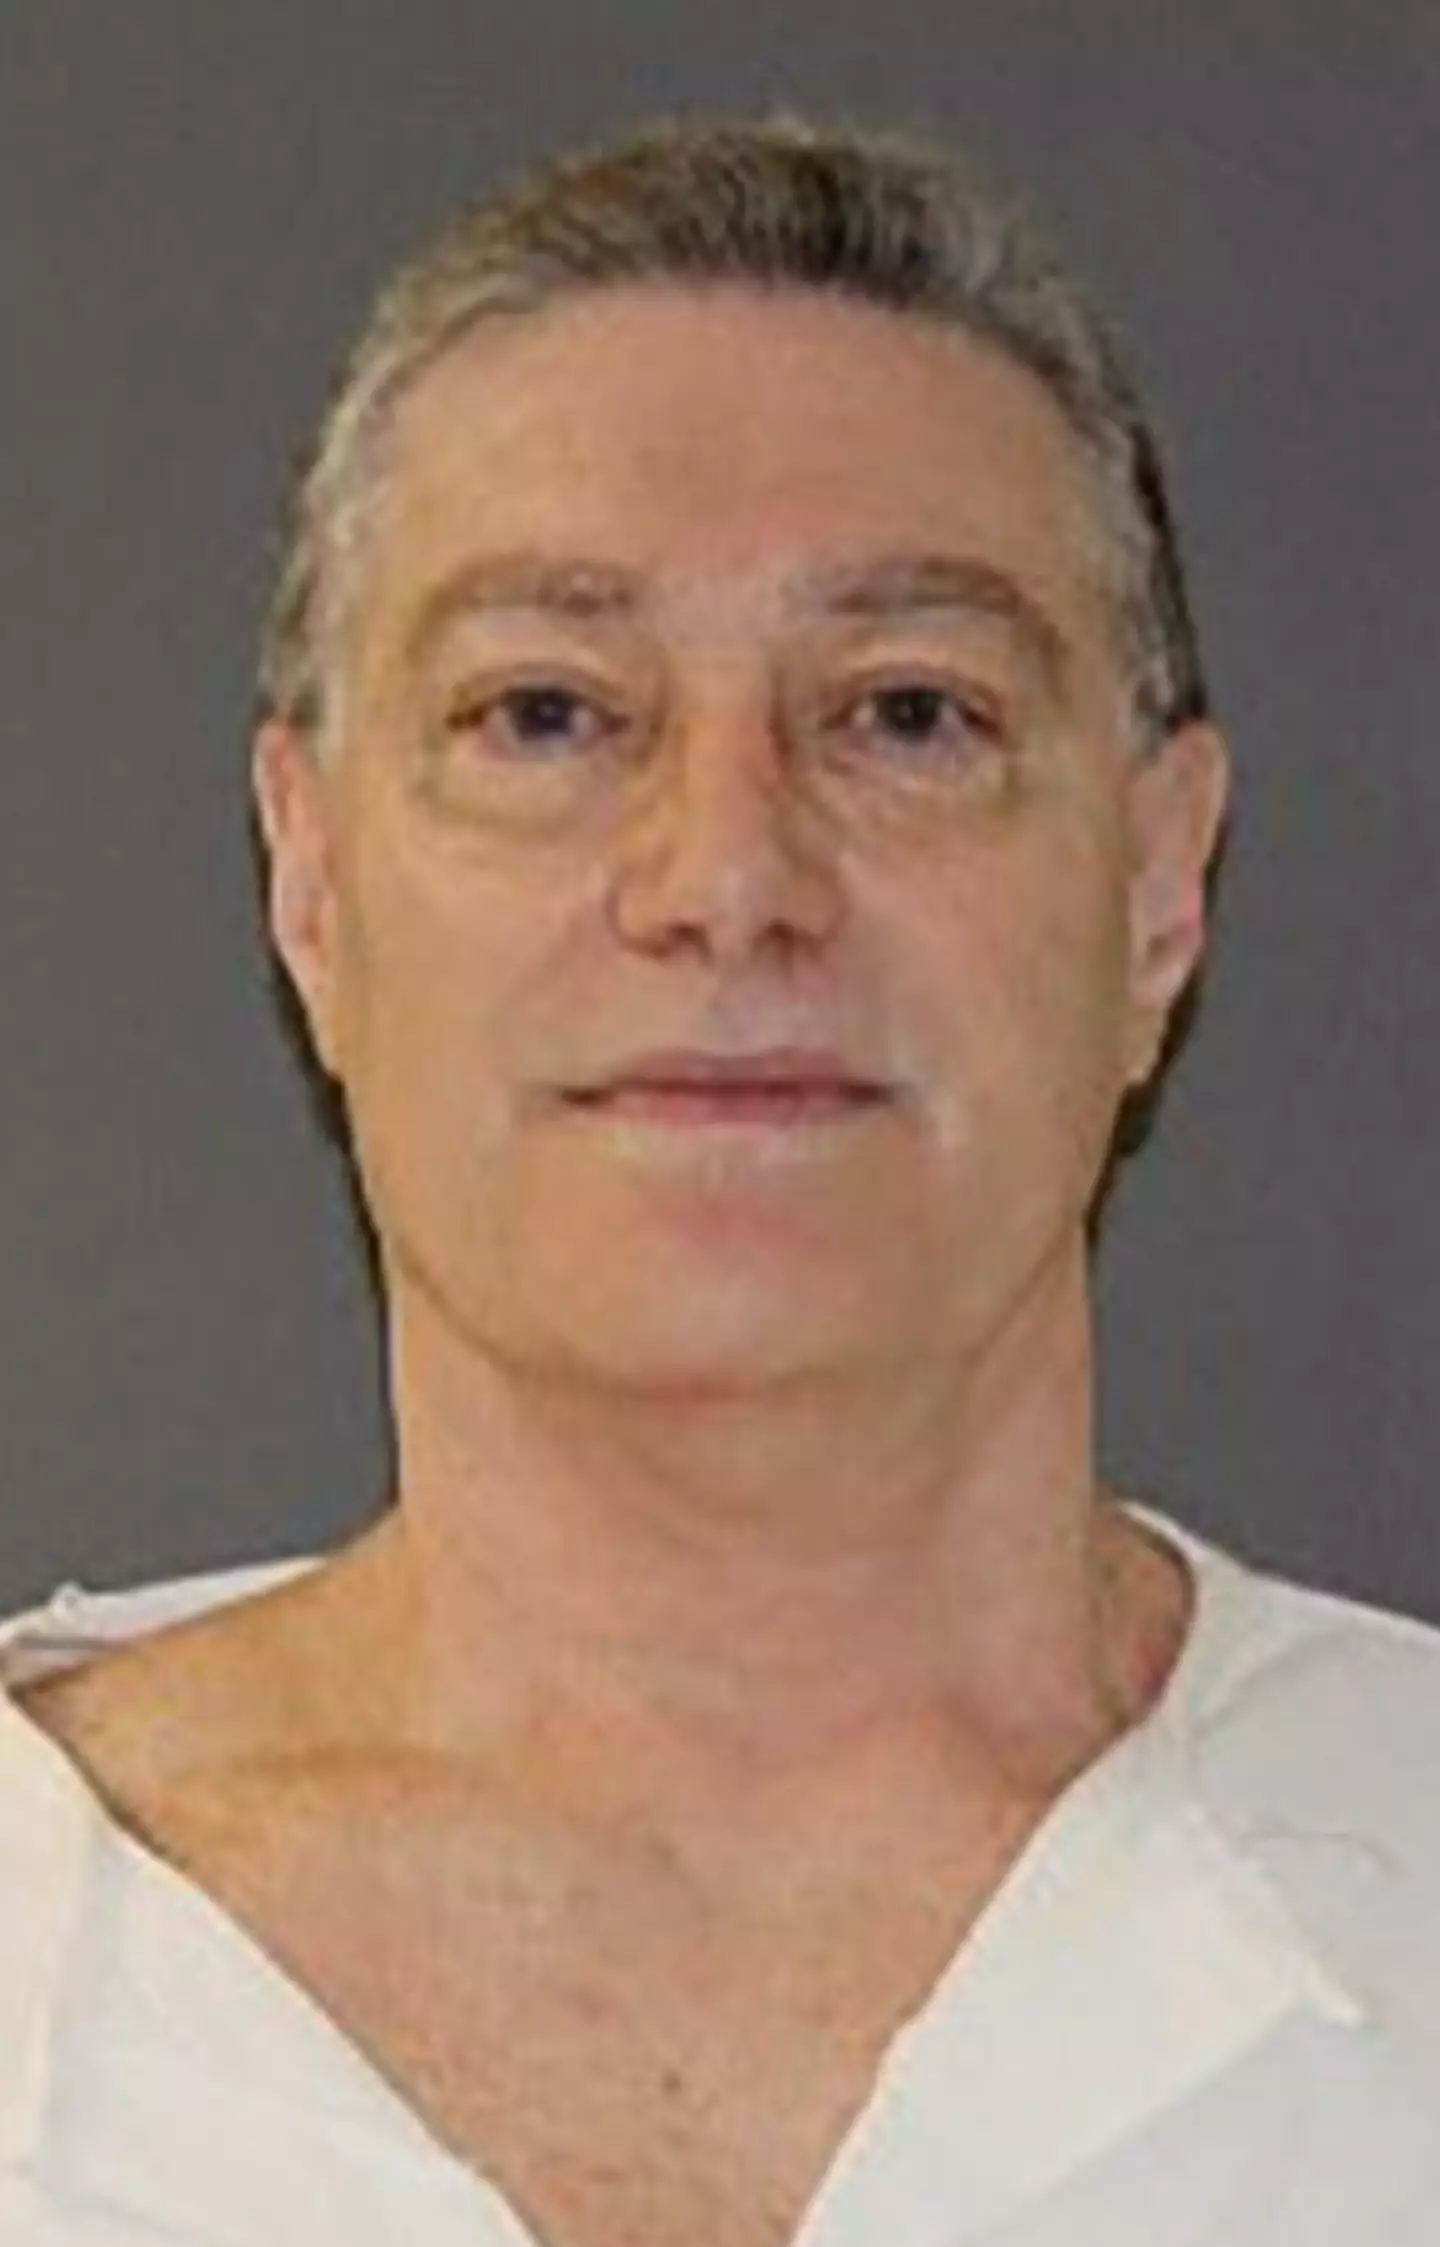 Fratta was executed after almost 30 years on death row.